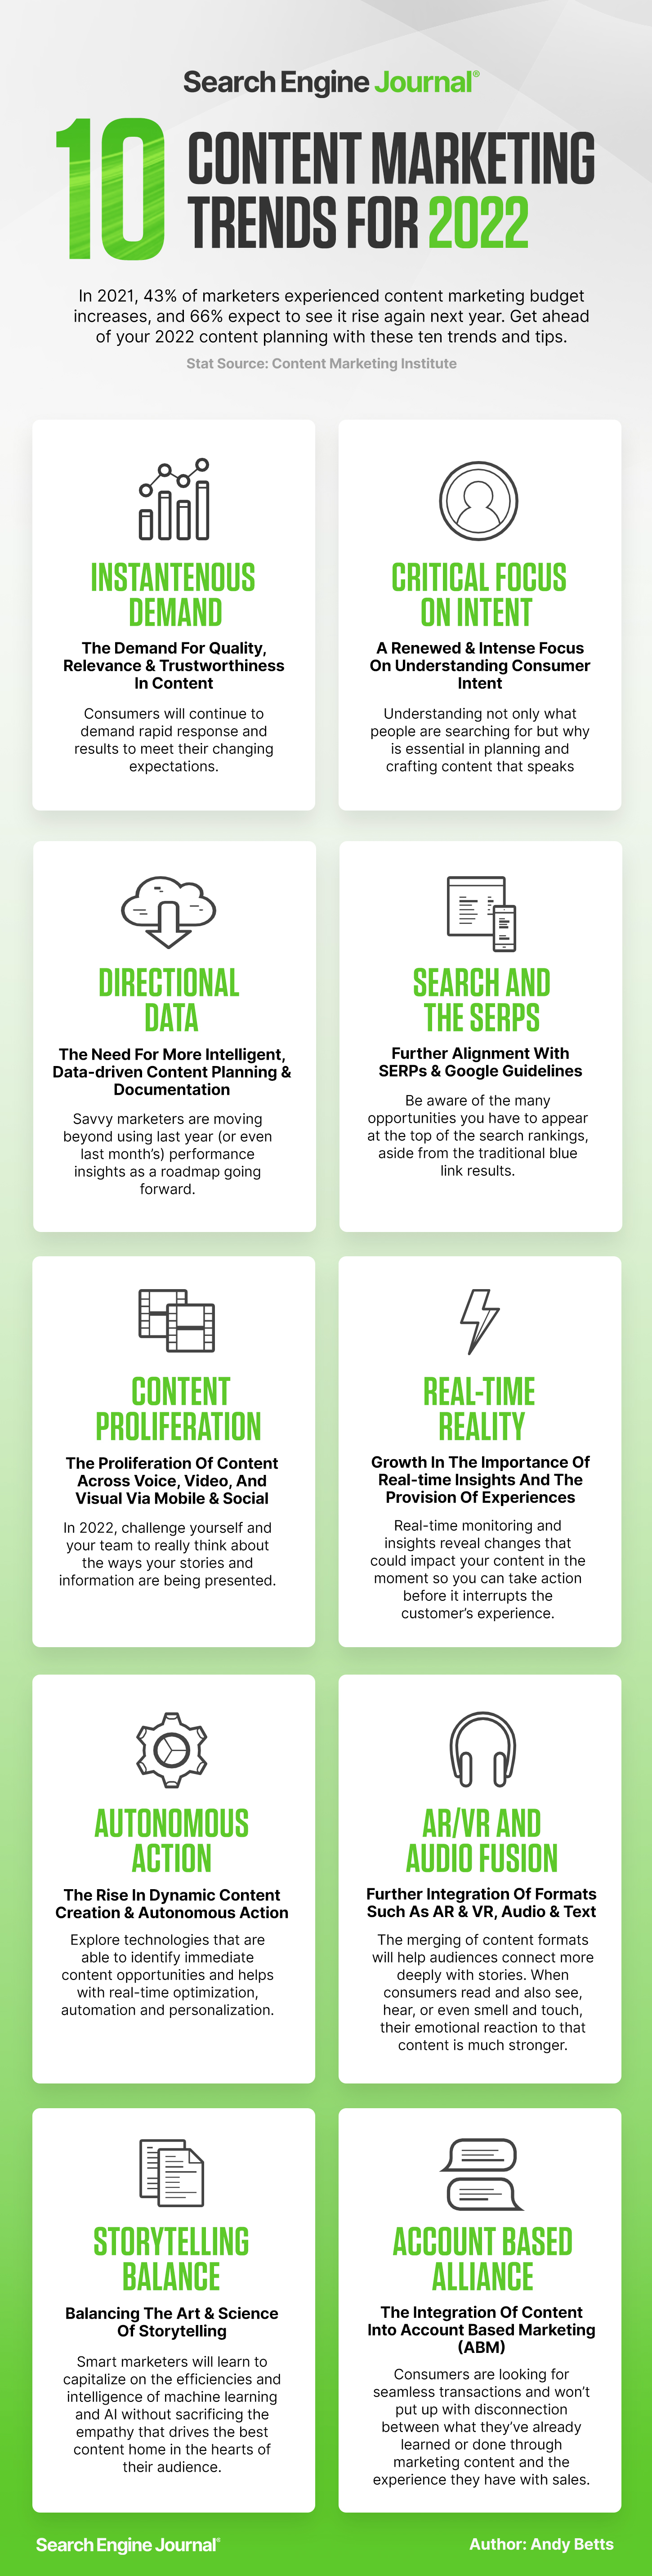 Content Marketing Trends for 2022 infographic